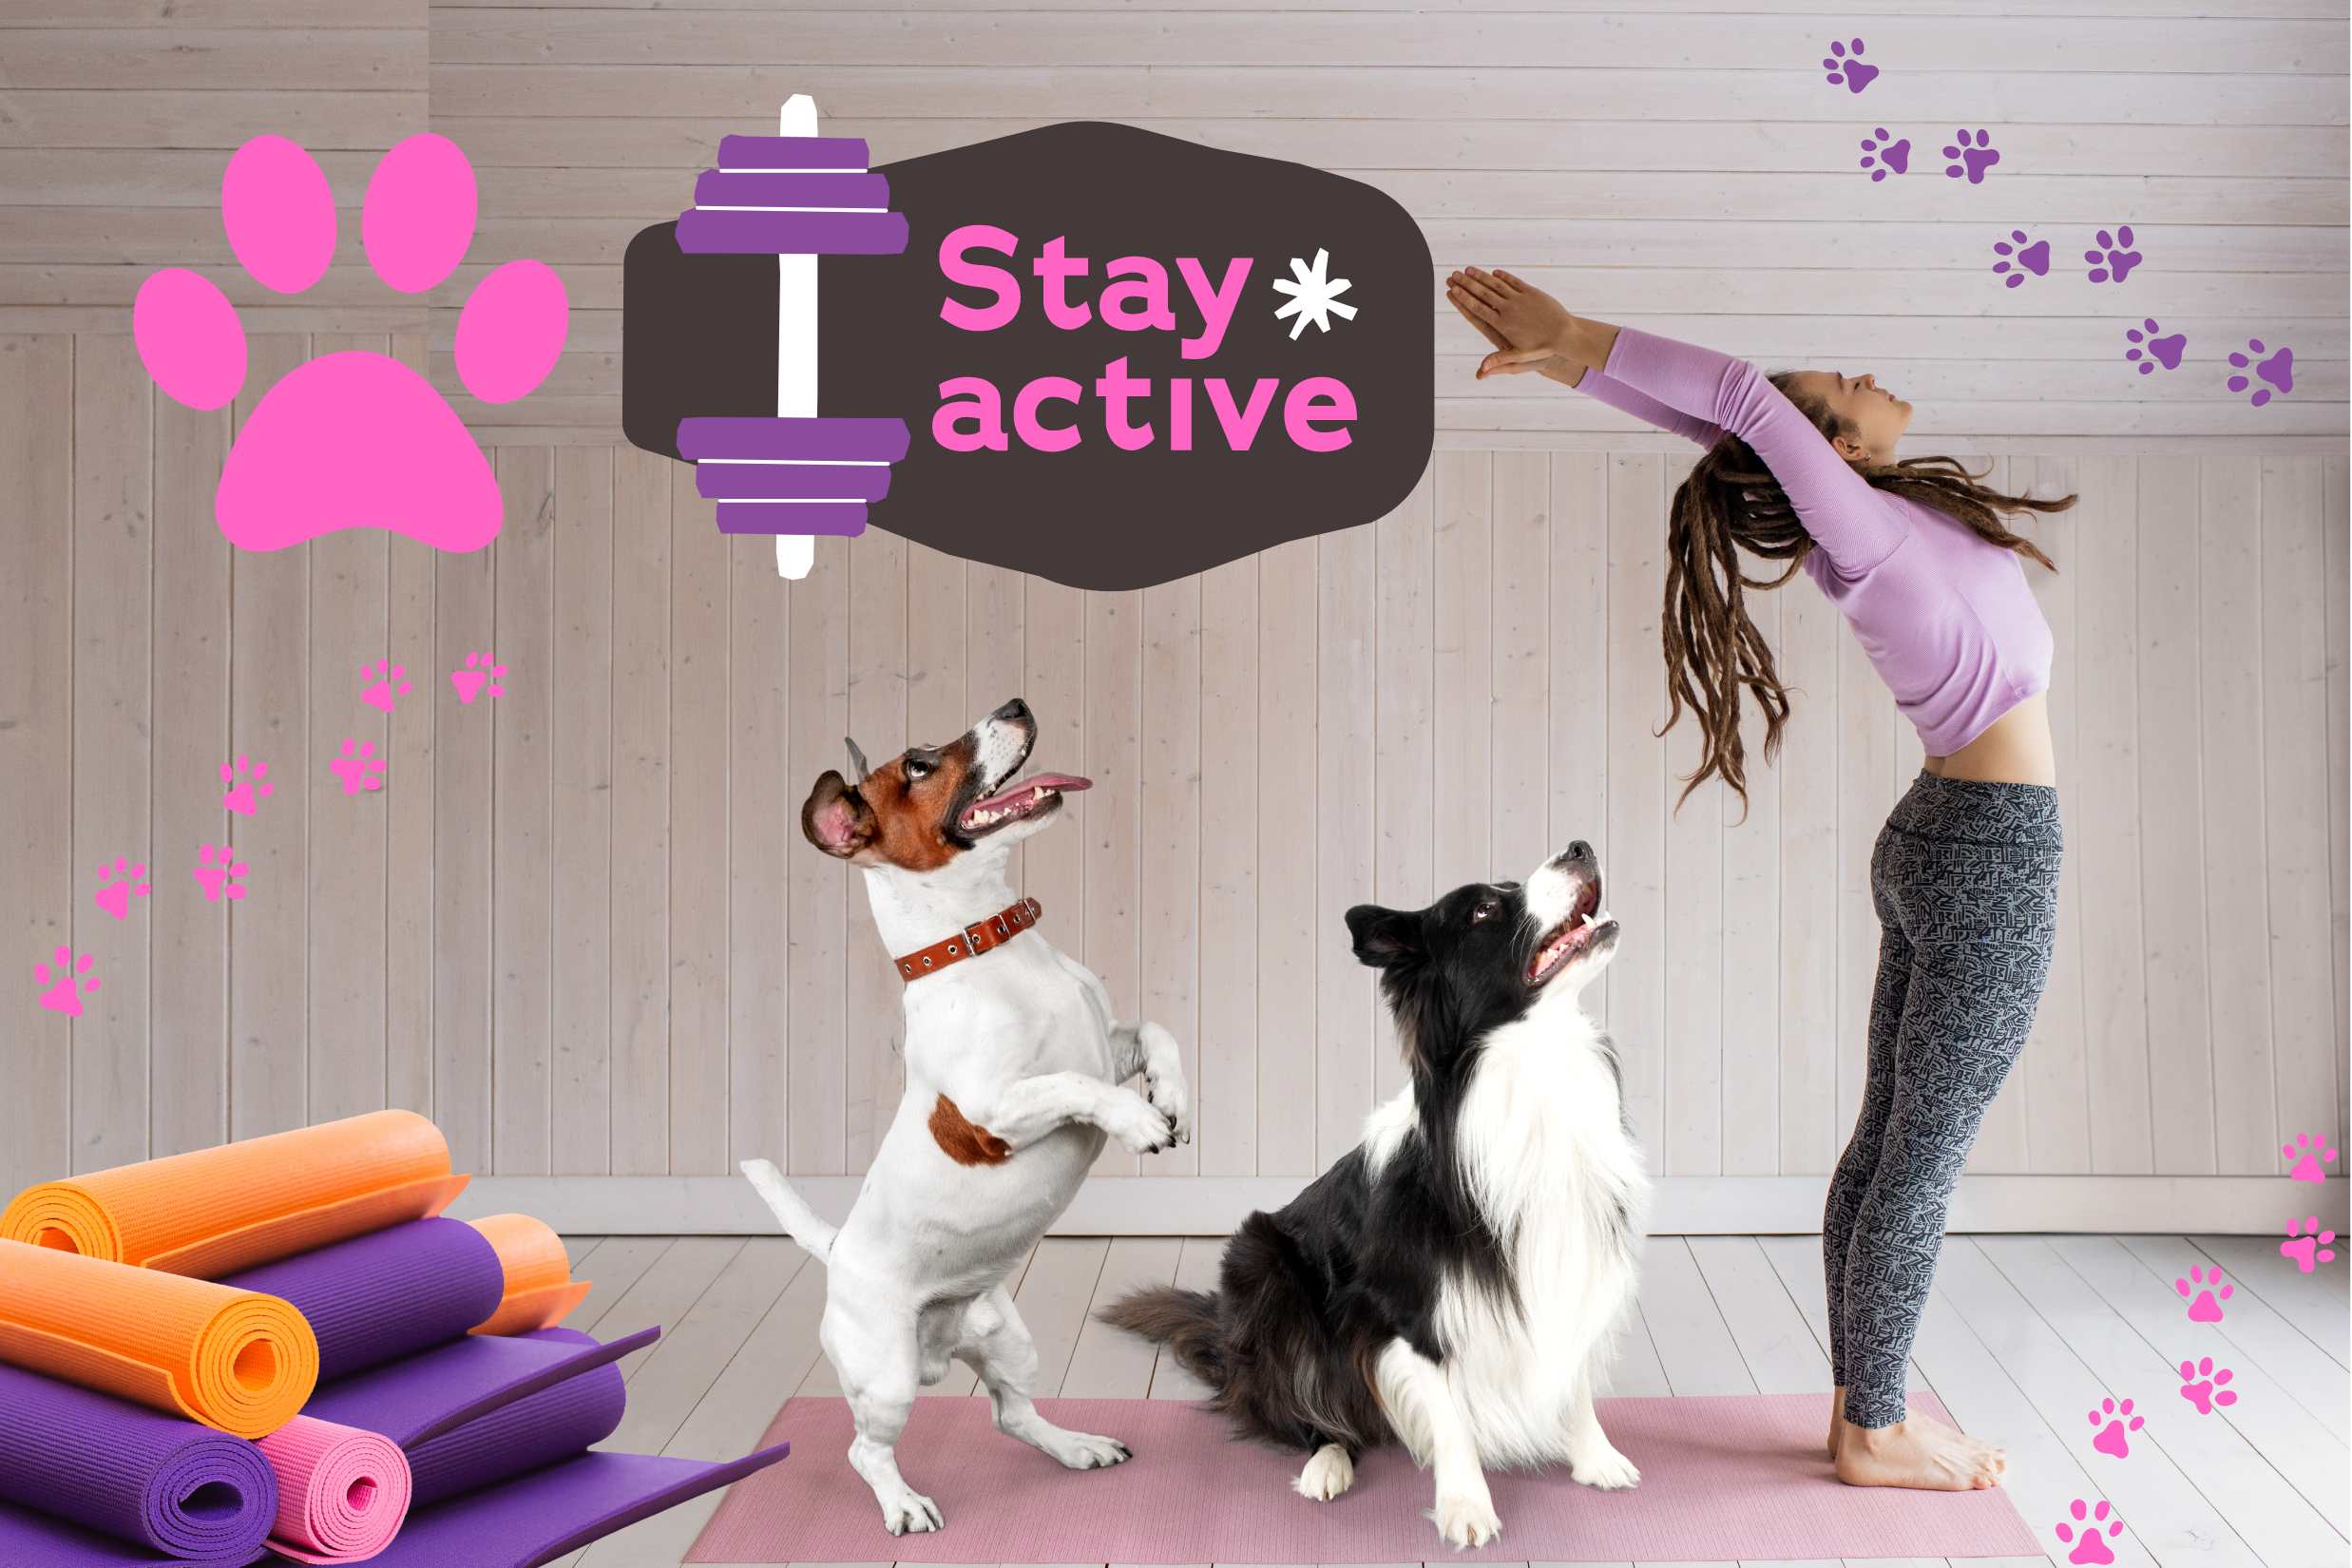 Exercise Workouts with Your Dog